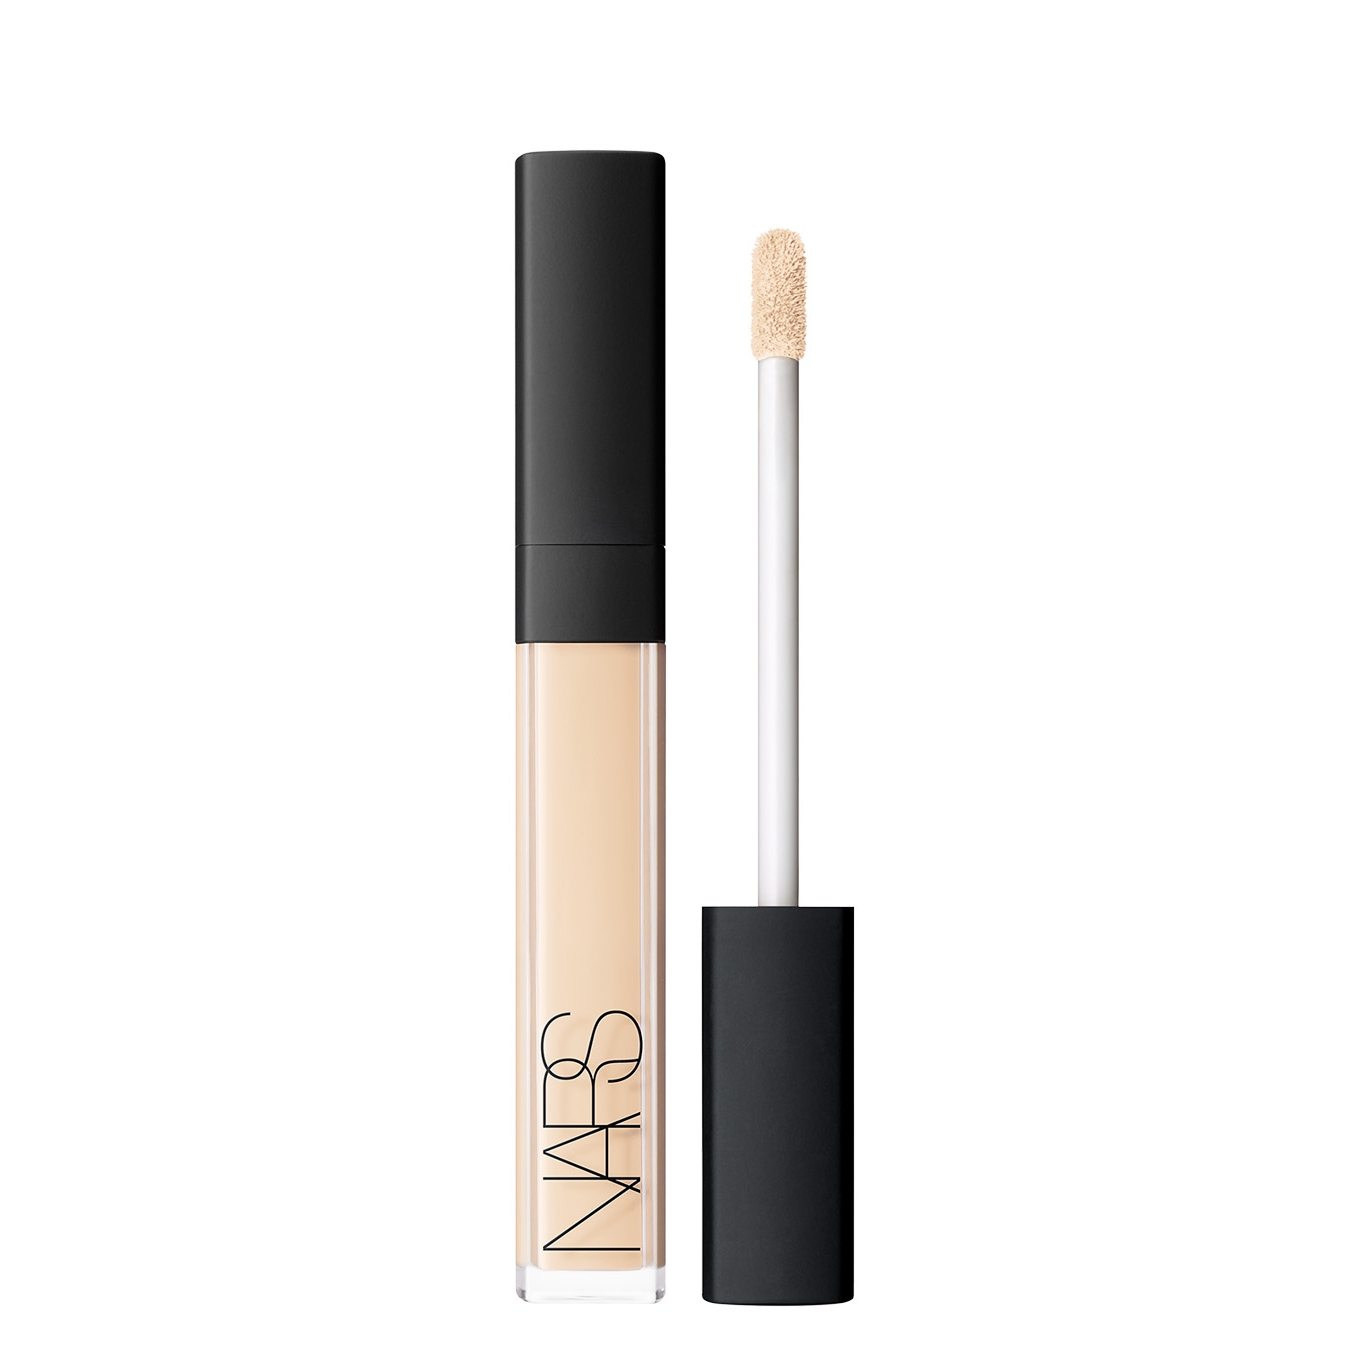 Nars Radiant Creamy Concealer - Chantilly